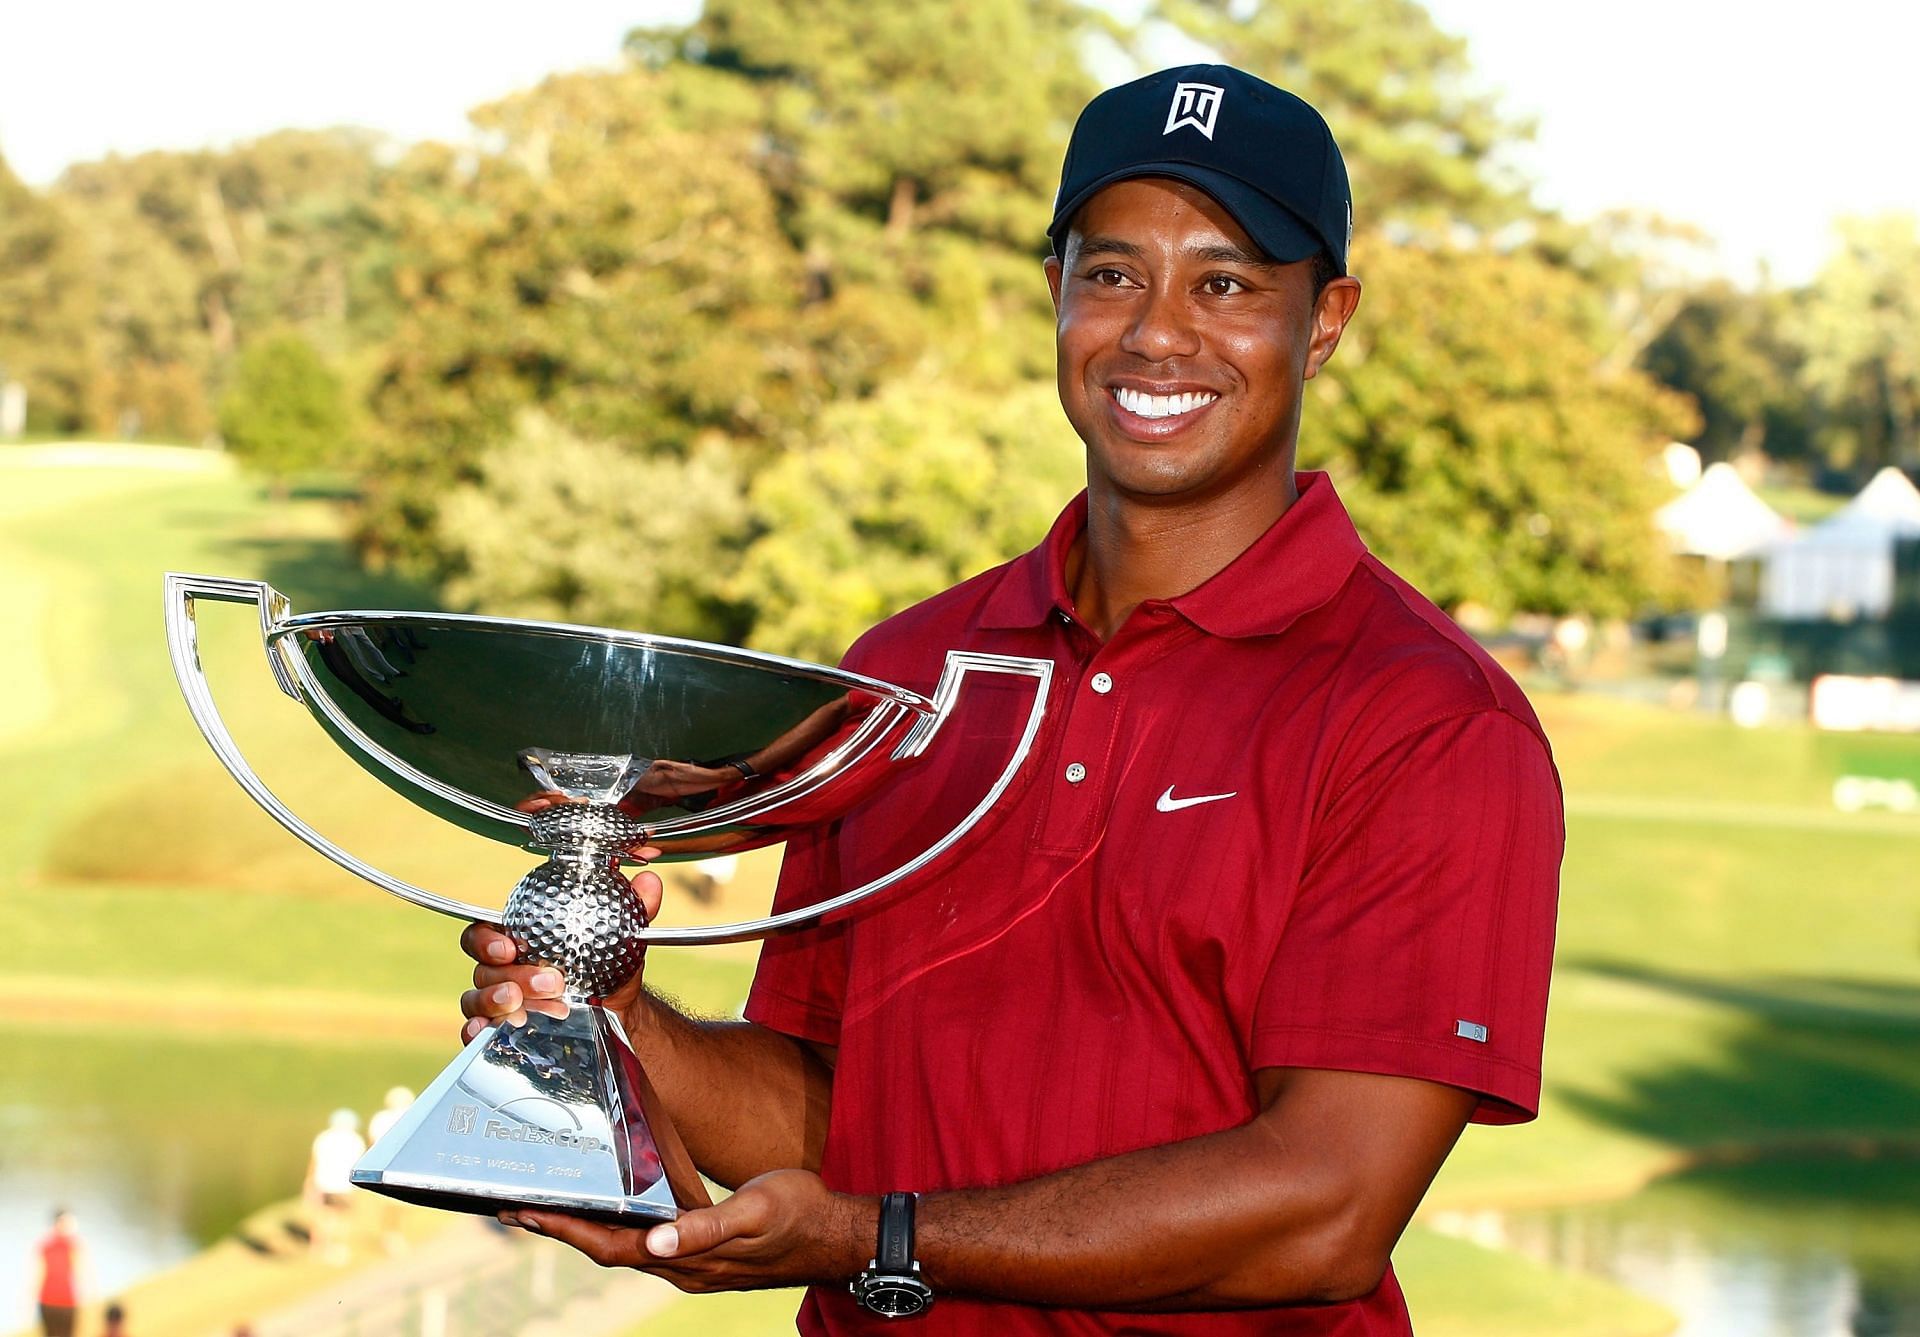 How many times has Tiger Woods won the FedEx Cup Playoffs? Exploring